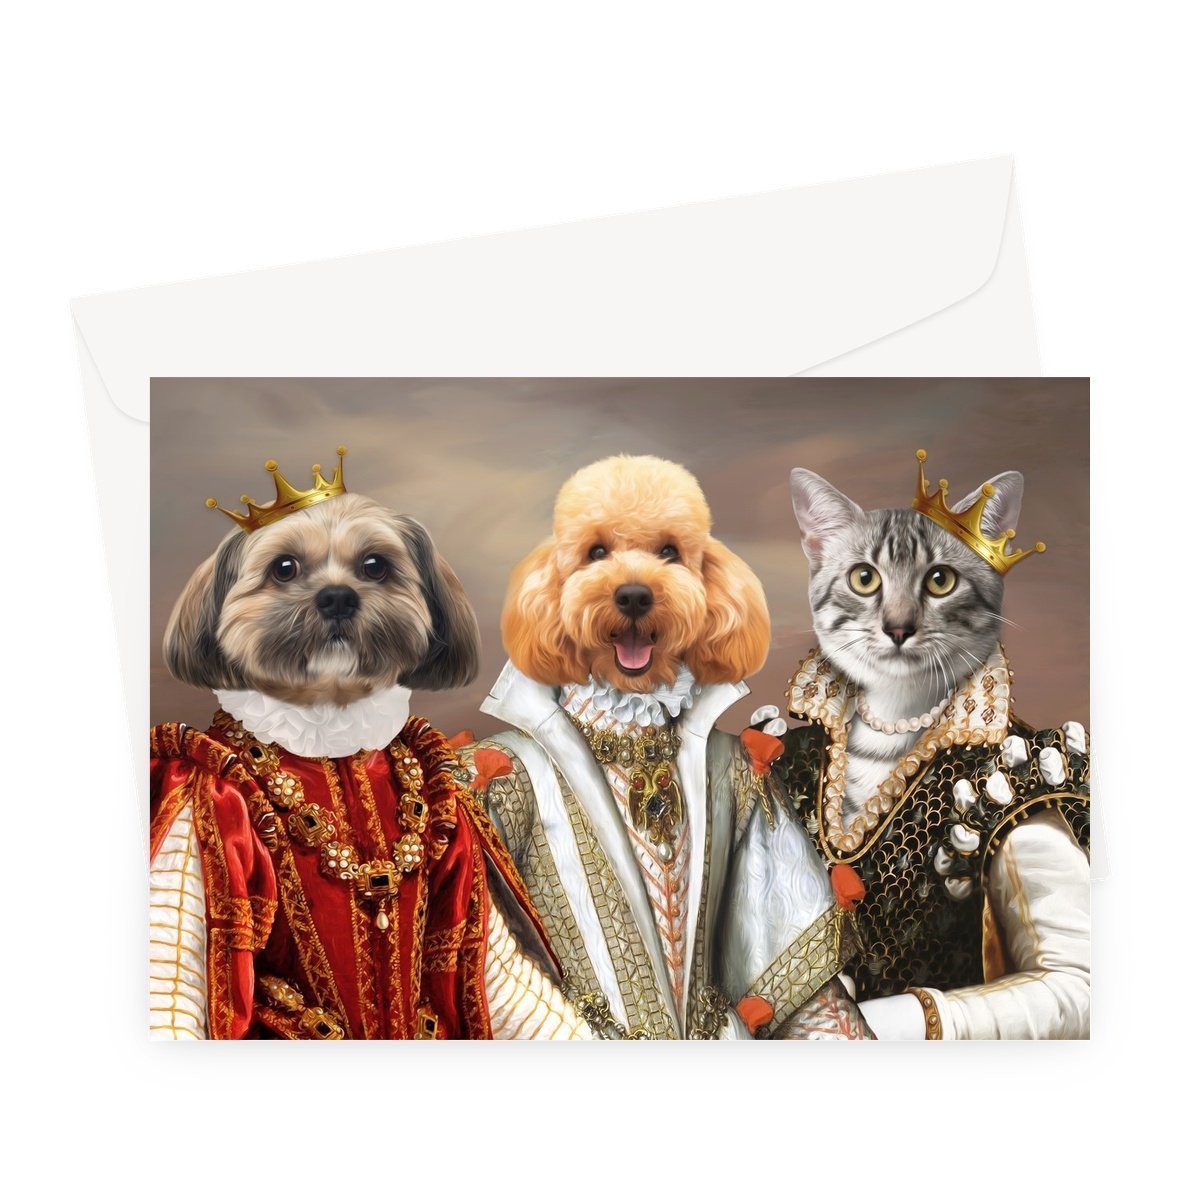 The Queens: Custom Pet Greeting Card - Paw & Glory - paw and glory, custom pet paintings, pet portrait admiral, dog portraits as humans, drawing pictures of pets, custom pet paintings, original pet portraits, pet portraits